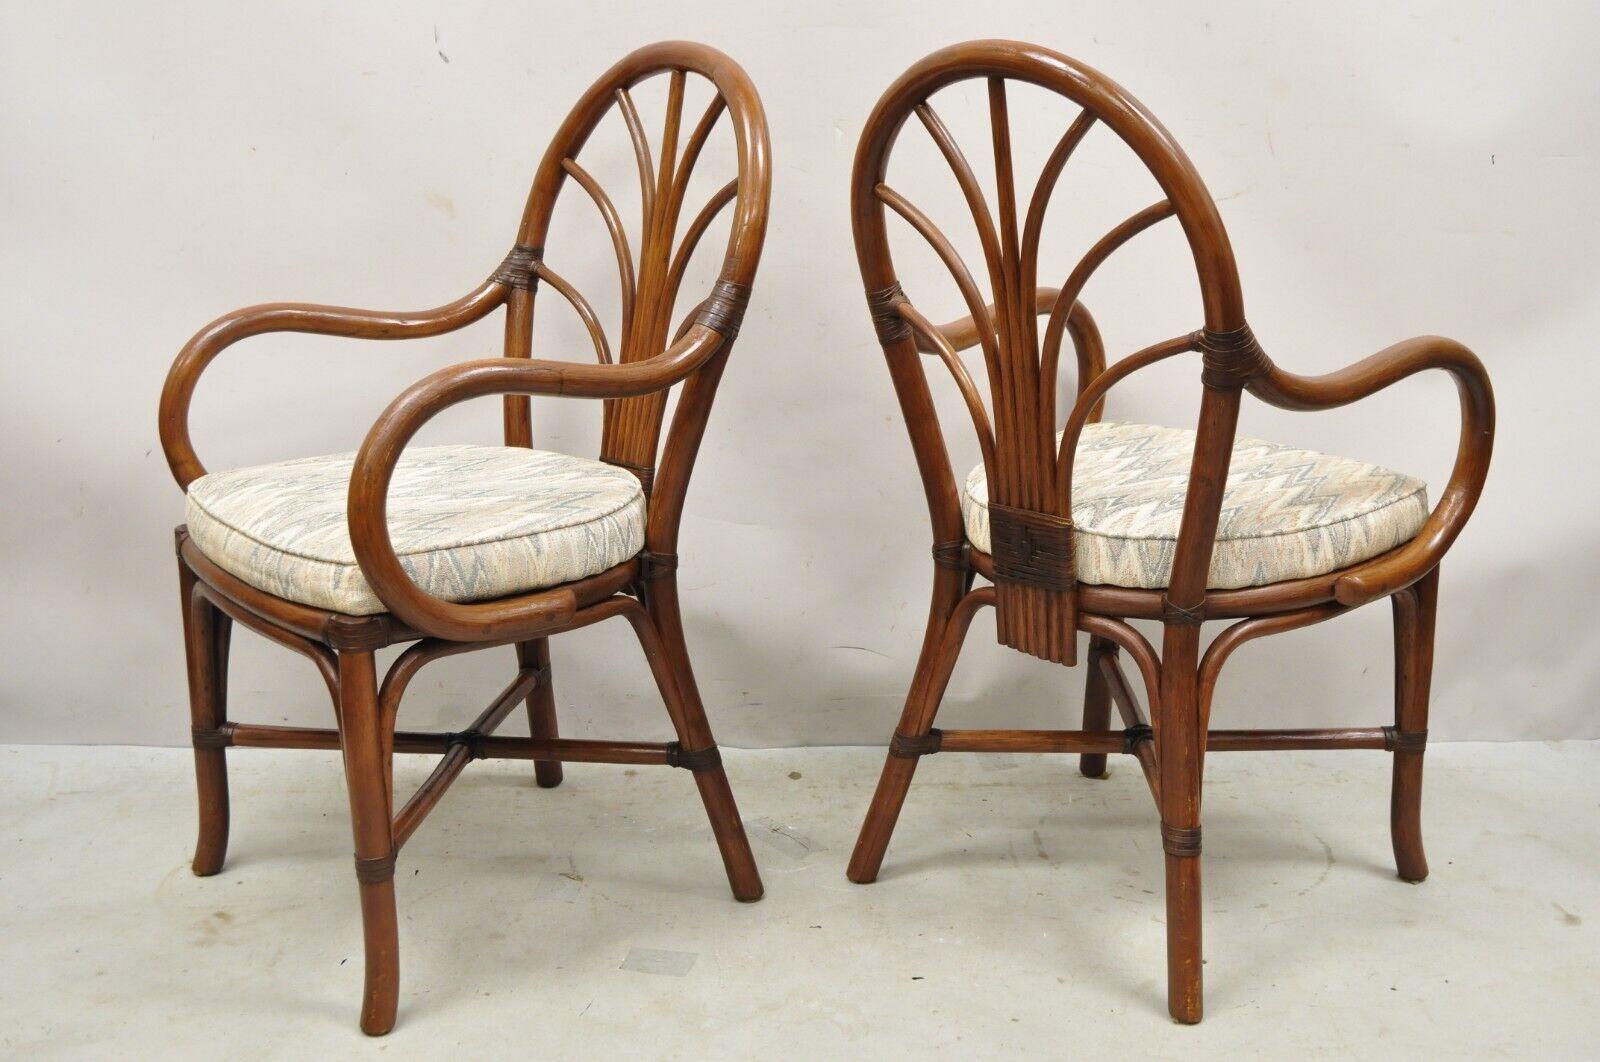 Vintage Bentwood Rattan Hollywood Regency Fan Back Dining Chairs - Set of 4. Circa Late 20th Century. Dimensions : 36